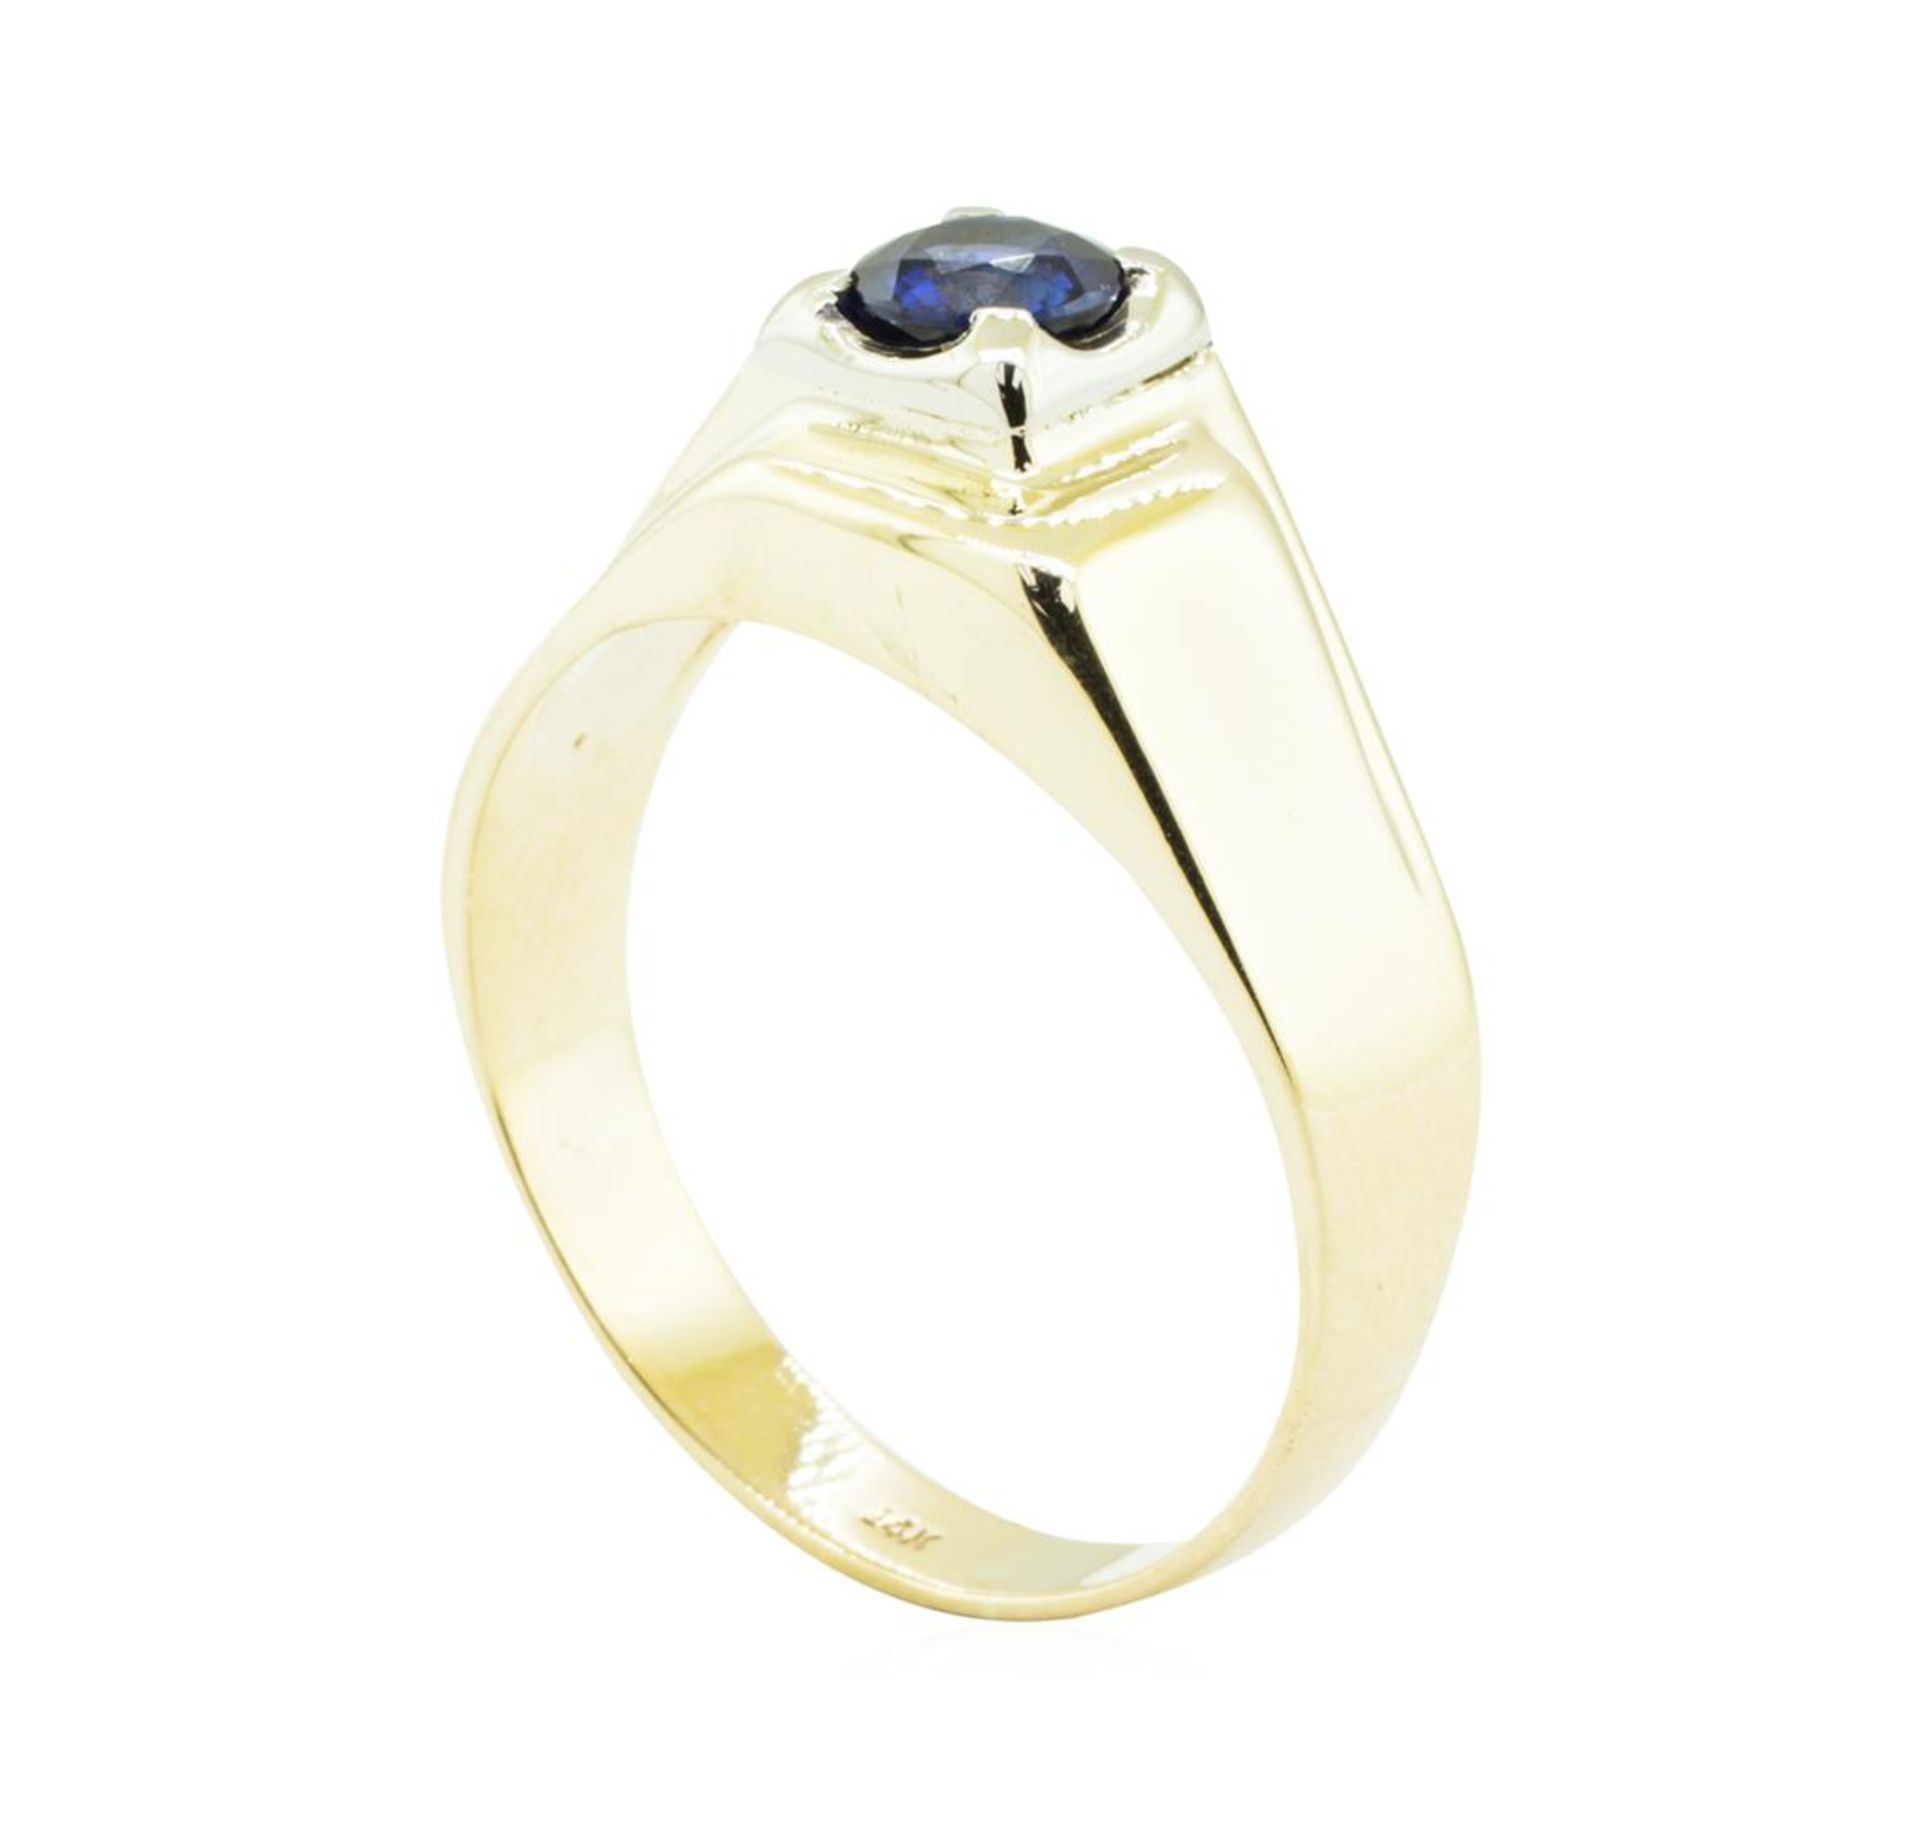 0.99ct Blue Sapphire Ring - 14KT Yellow Gold - Image 4 of 4